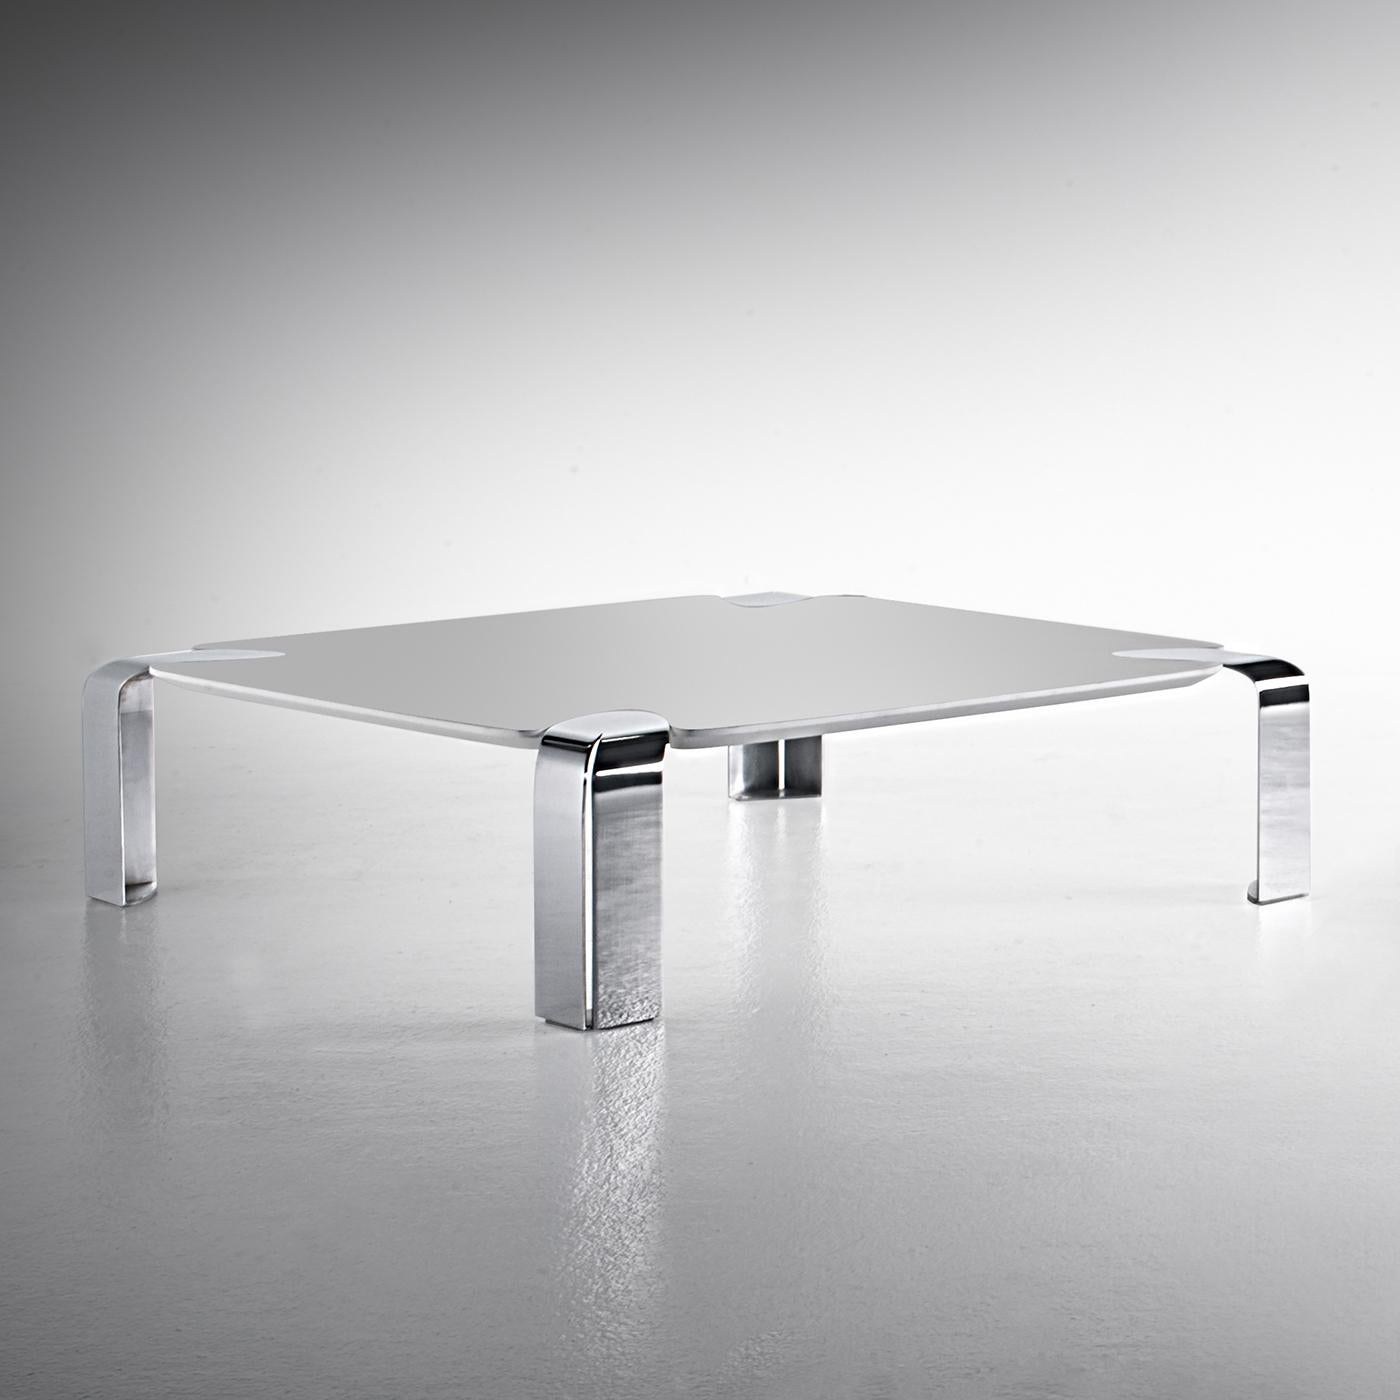 Coffee table follow with 4 chromed metal feet.
With white lacquered glass top, 10mm thickness.
Available in:
L 80 x D 80 x H 35 or 42cm, price: 2900,00€.
L 90 x D 90 x H 35 or 42cm, price: 3200,00€.
Also available 4 bronzed metal feet.
With